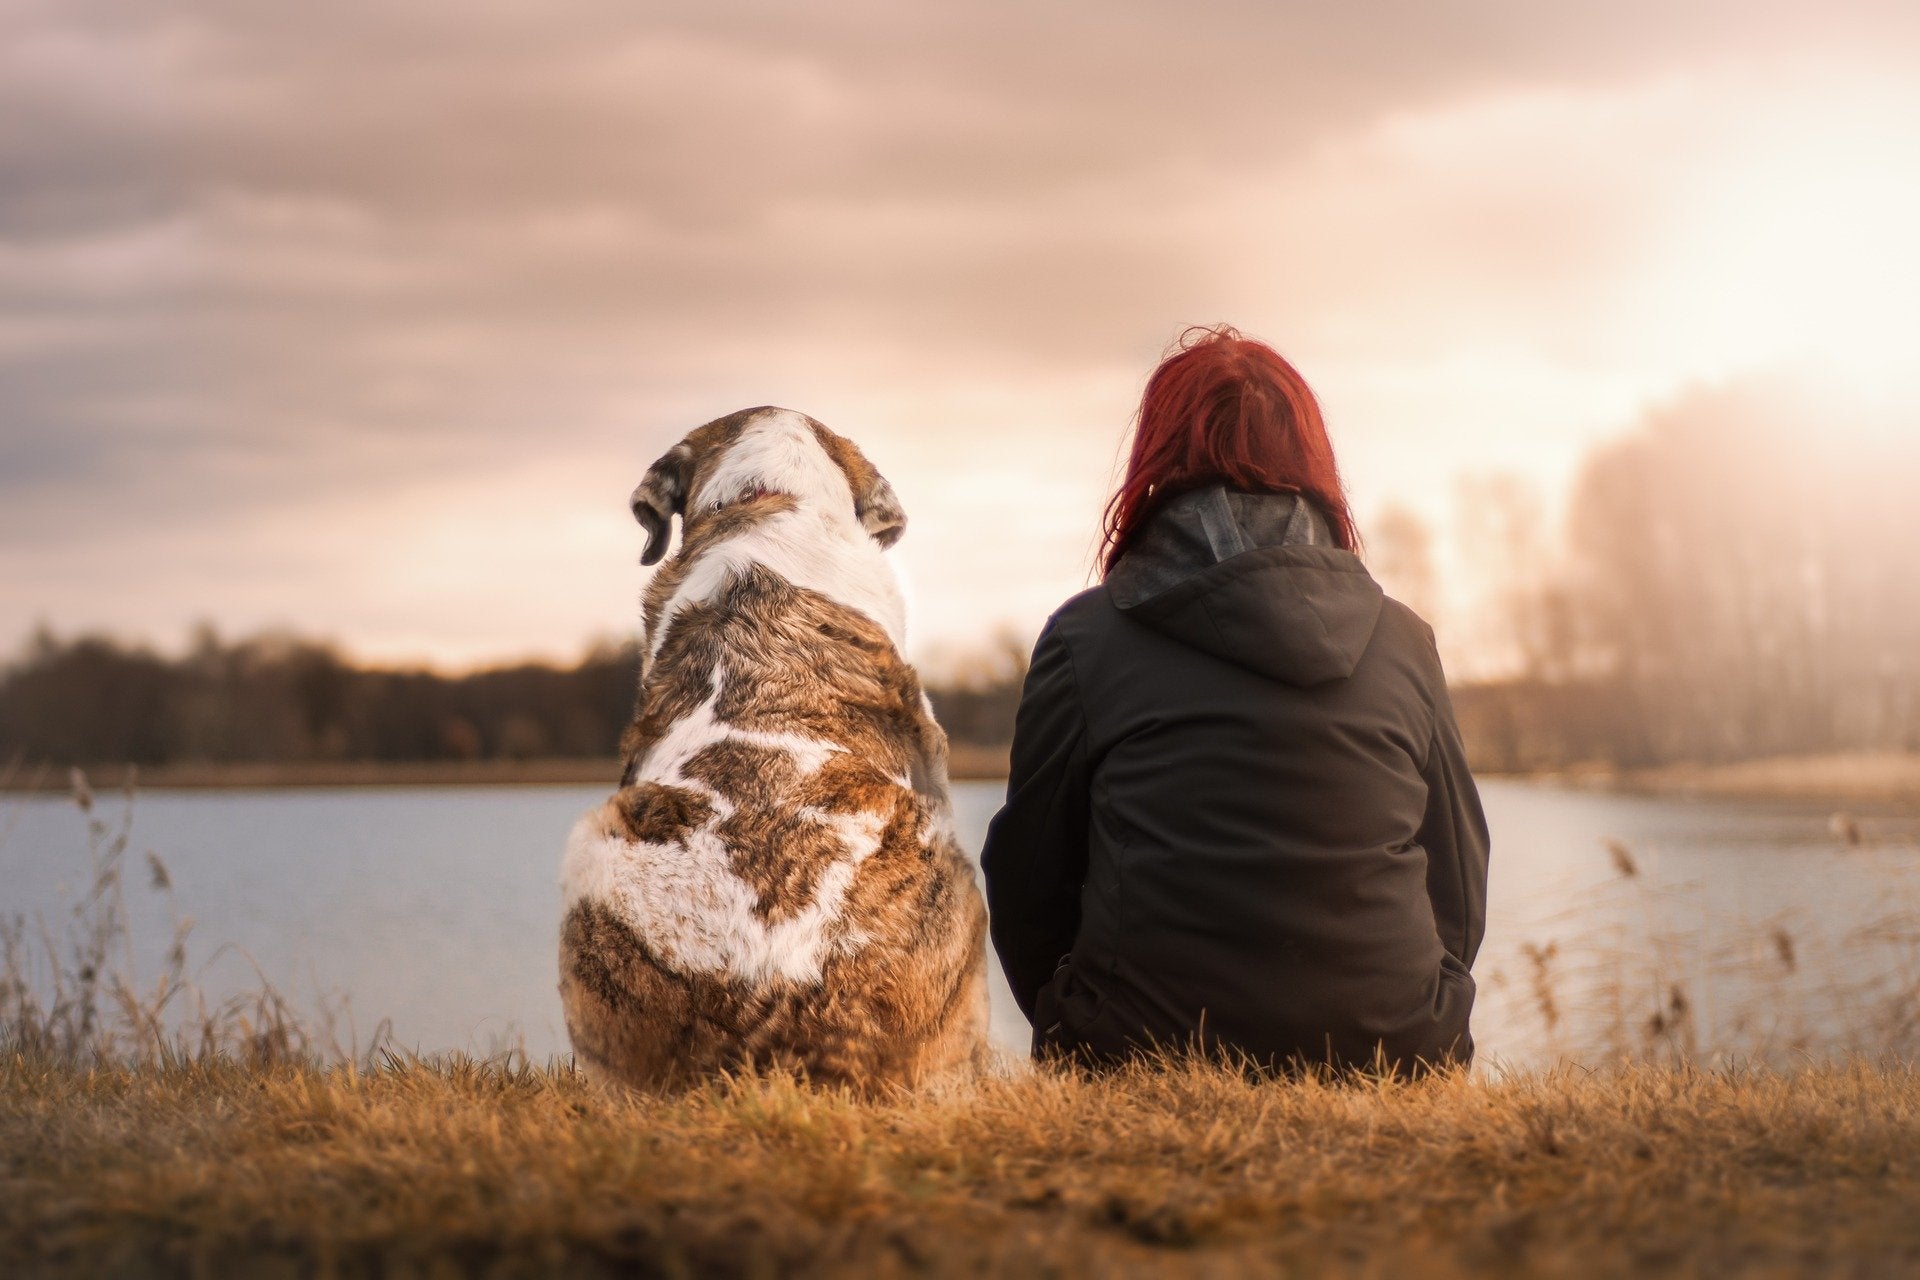 Woman with red hair sitting next to a dog watching the sunrise over the lake